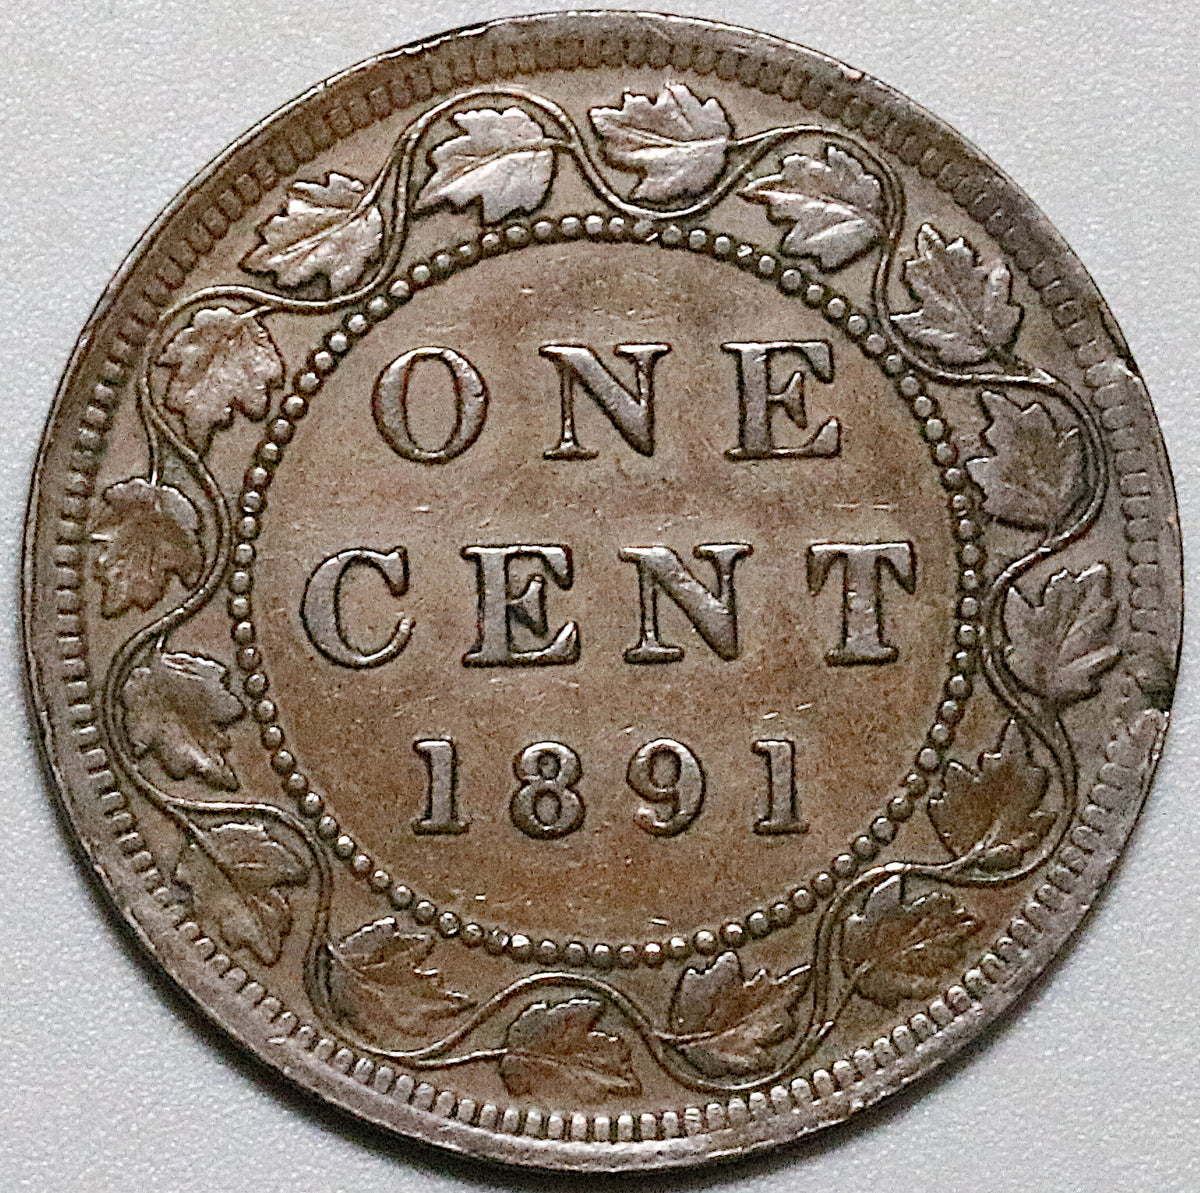 Coins and Canada - 1 cent 1907 - Proof, Proof-like, Specimen, Brilliant  uncirculated